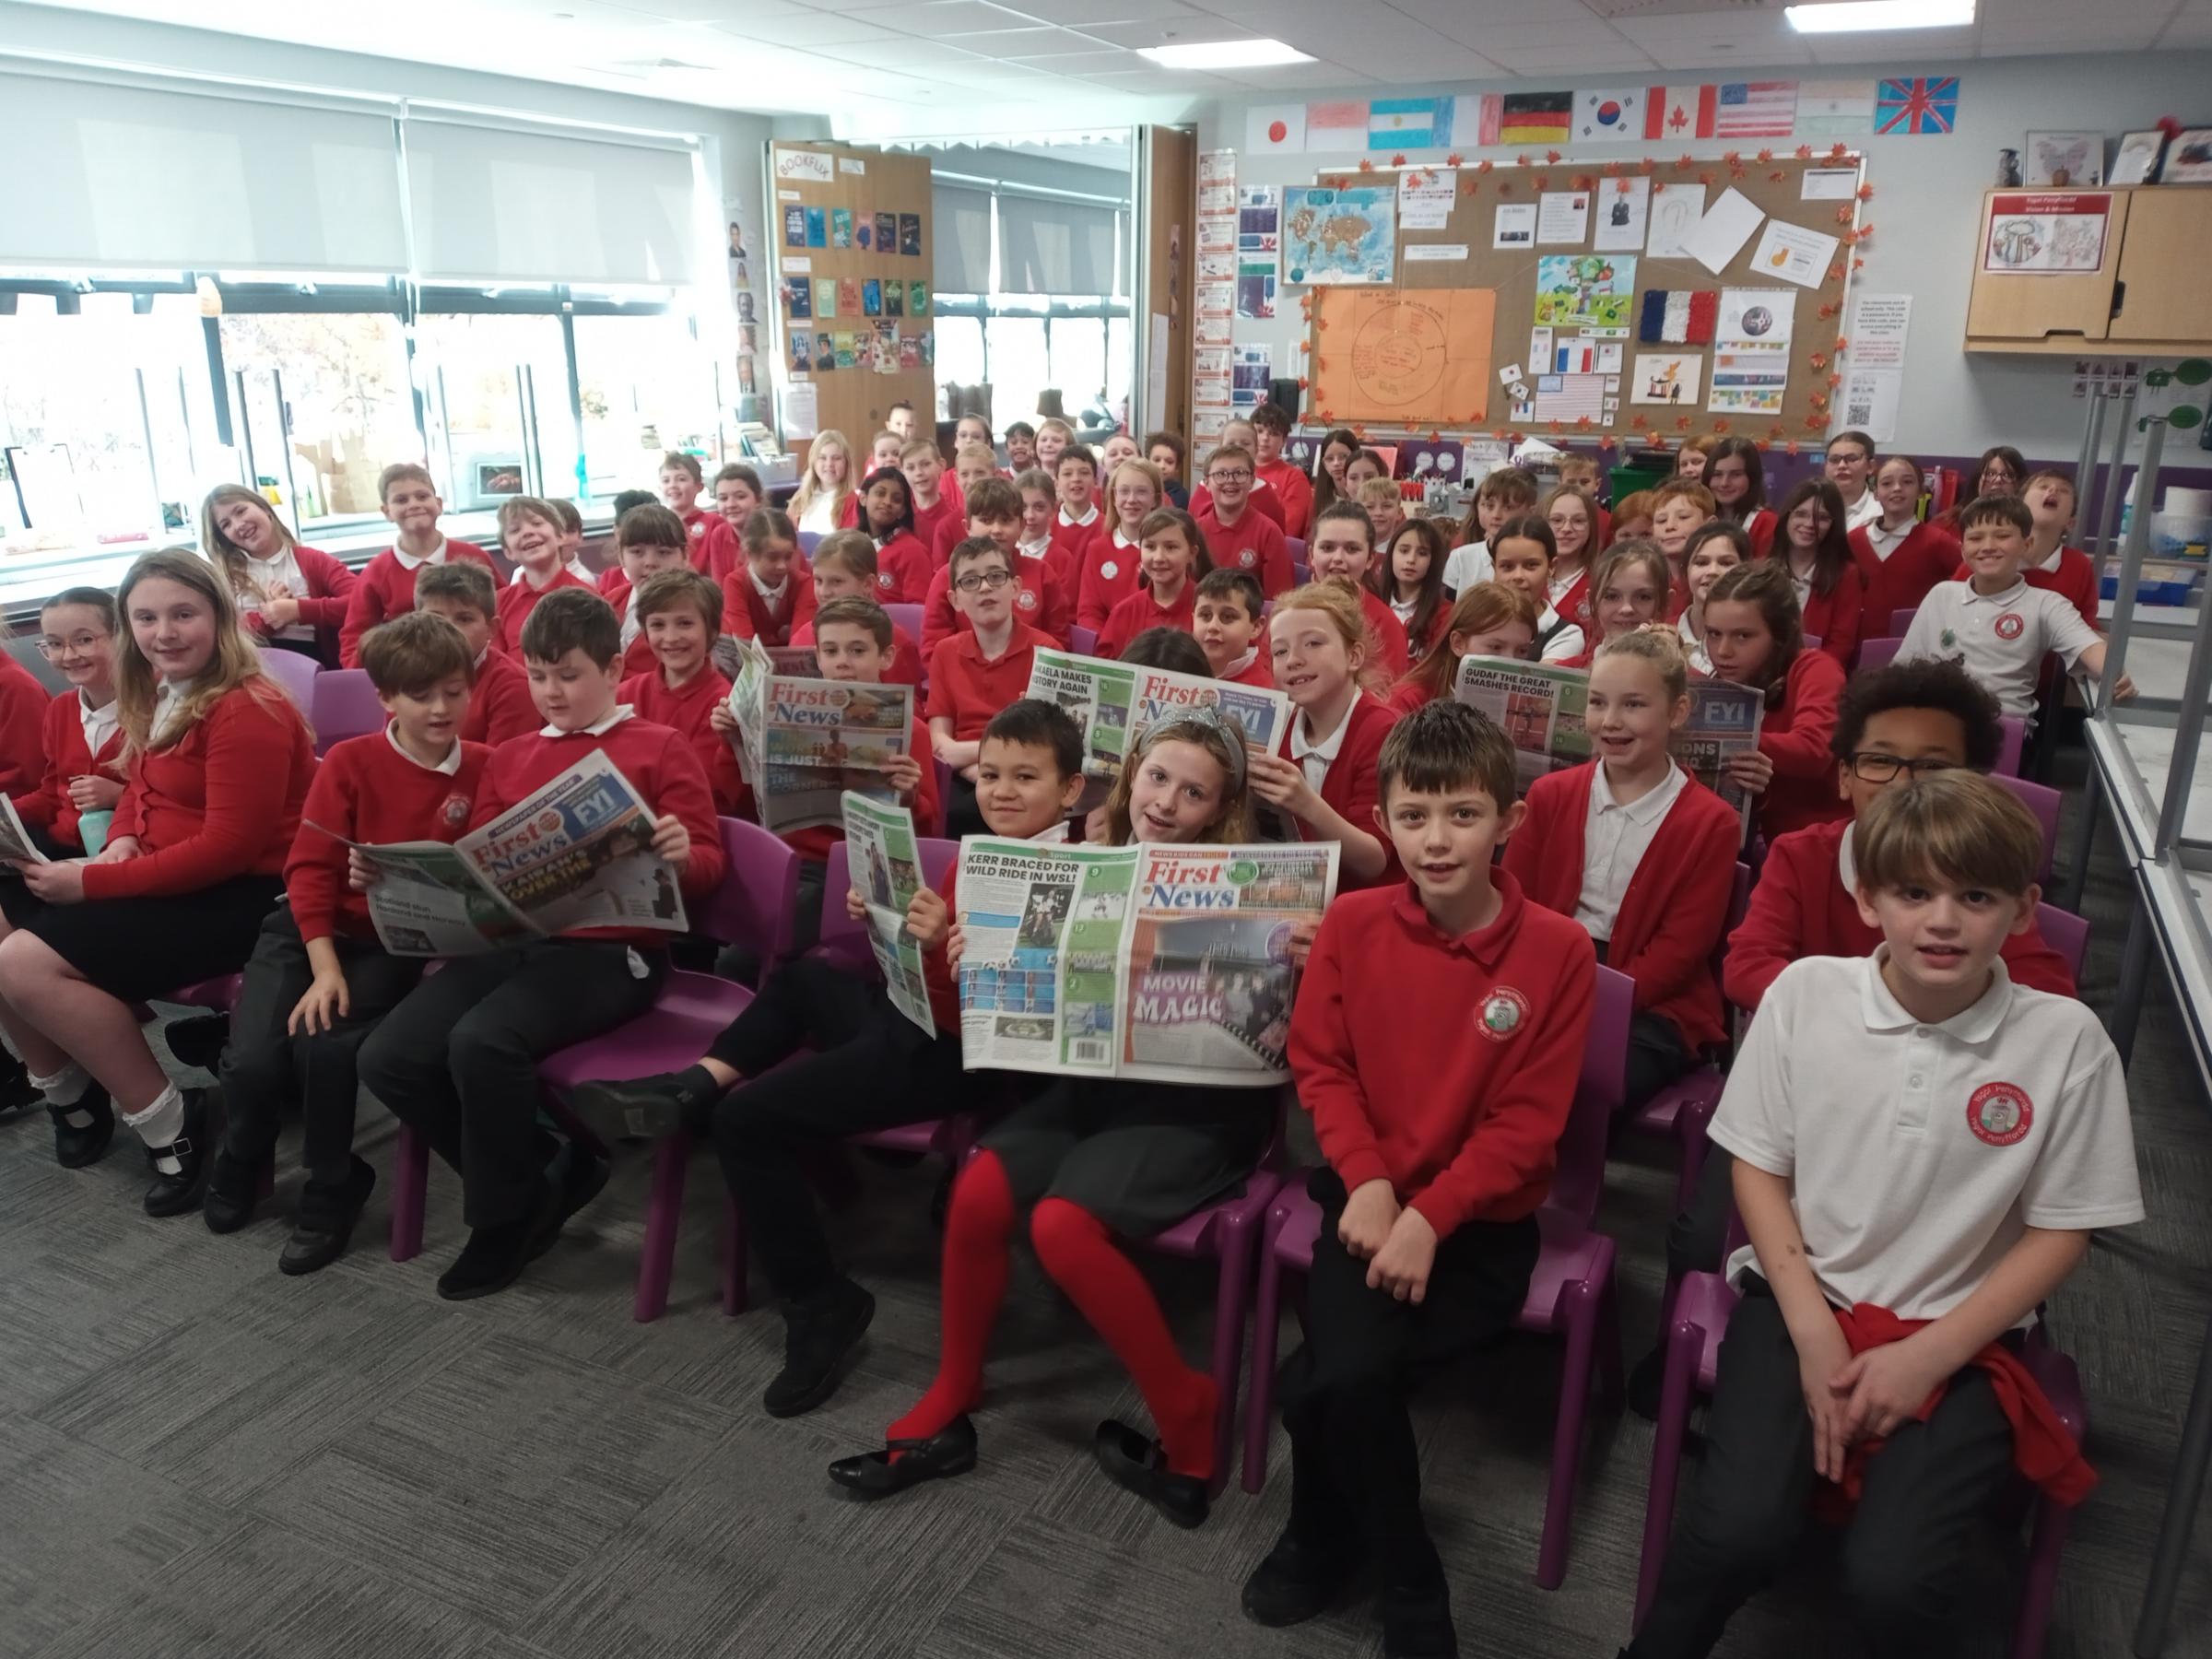 A curious and enthusiastic group of budding journalists at Ysgol Penyffordd.